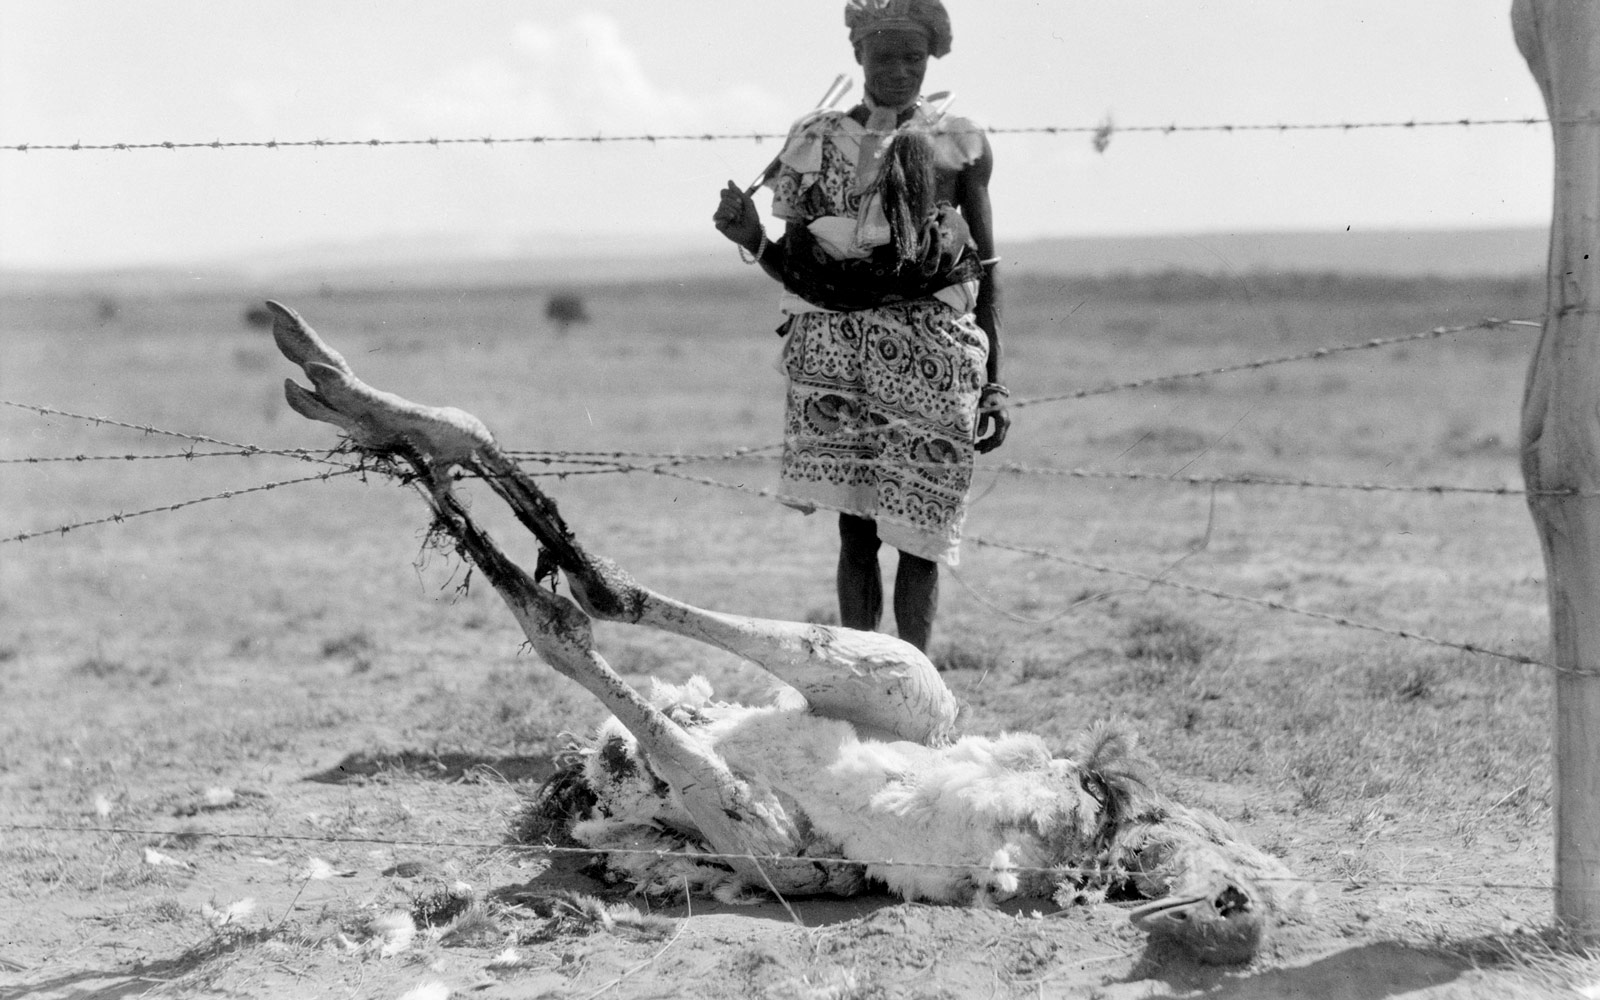 Ostrich succumbed by entanglement in barbed wire. Rift Valley, 1936